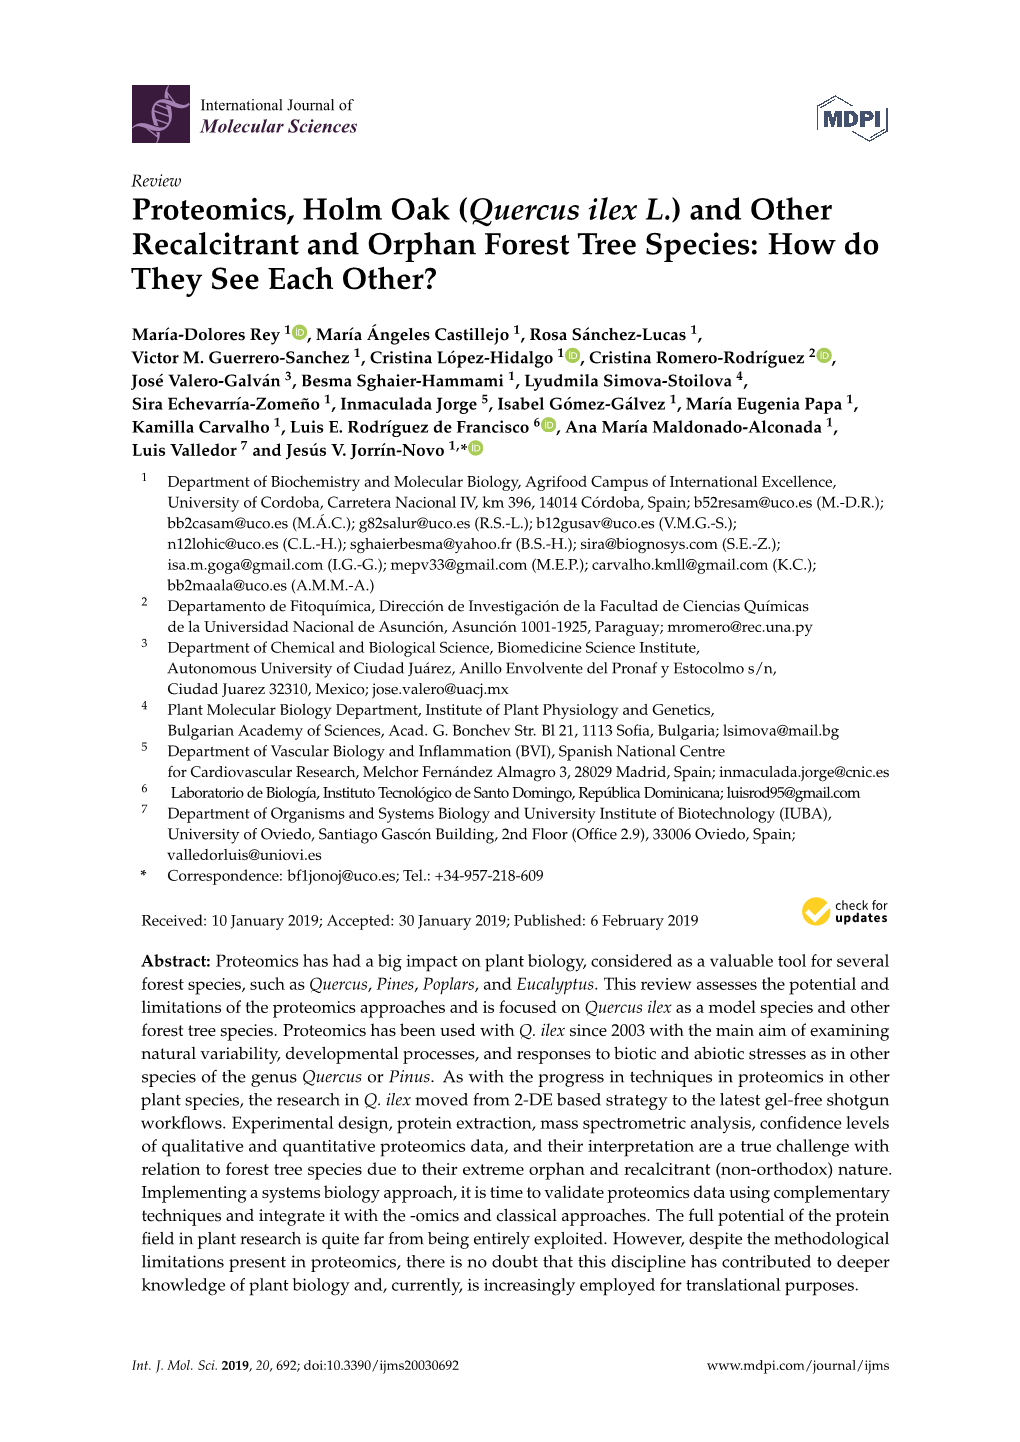 Proteomics, Holm Oak (Quercus Ilex L.) and Other Recalcitrant and Orphan Forest Tree Species: How Do They See Each Other?